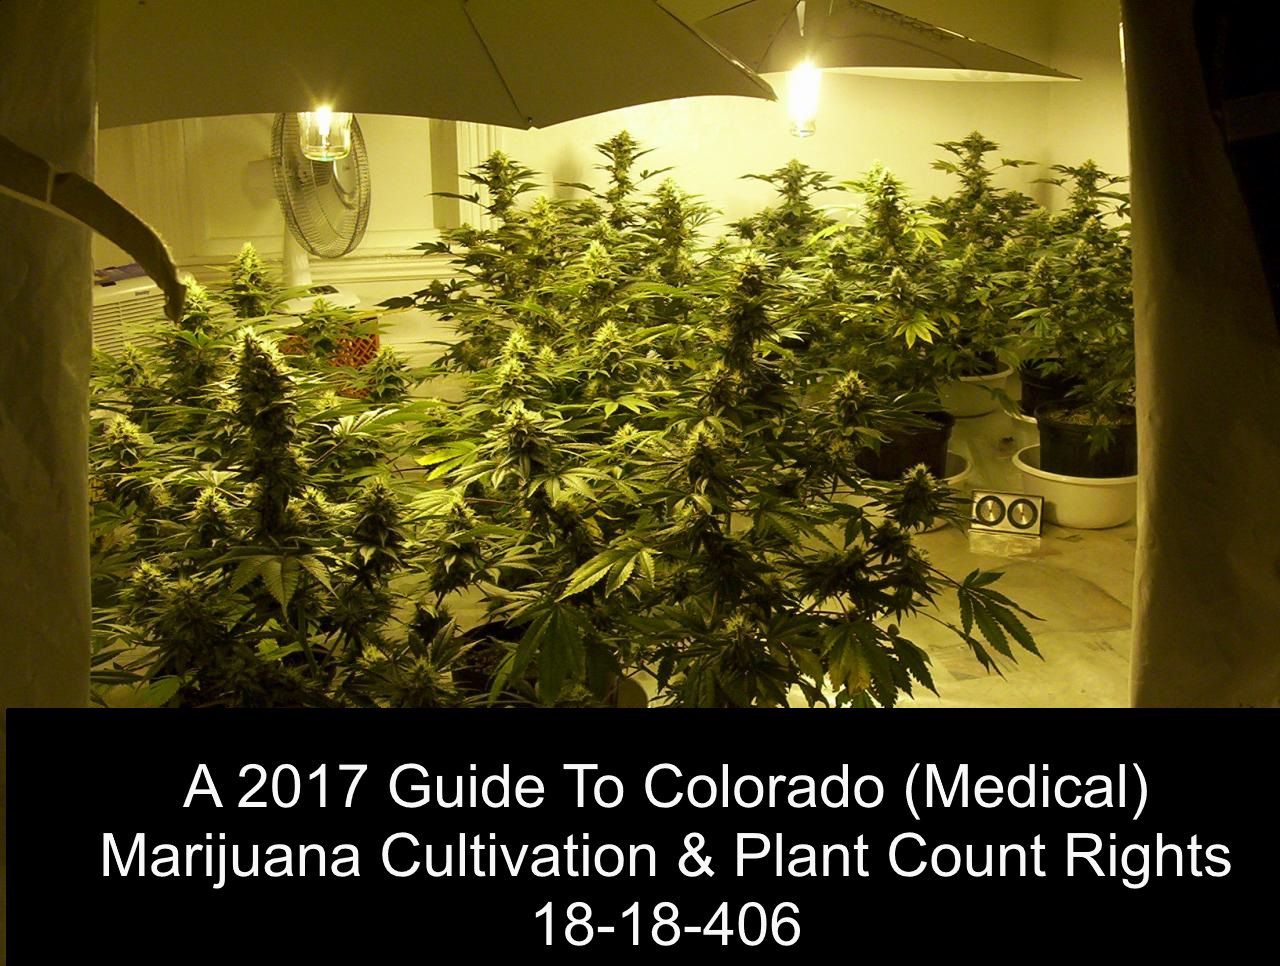 A 2017 Guide To Colorado (Medical) Marijuana Cultivation & Plant Count Rights 18-18-406